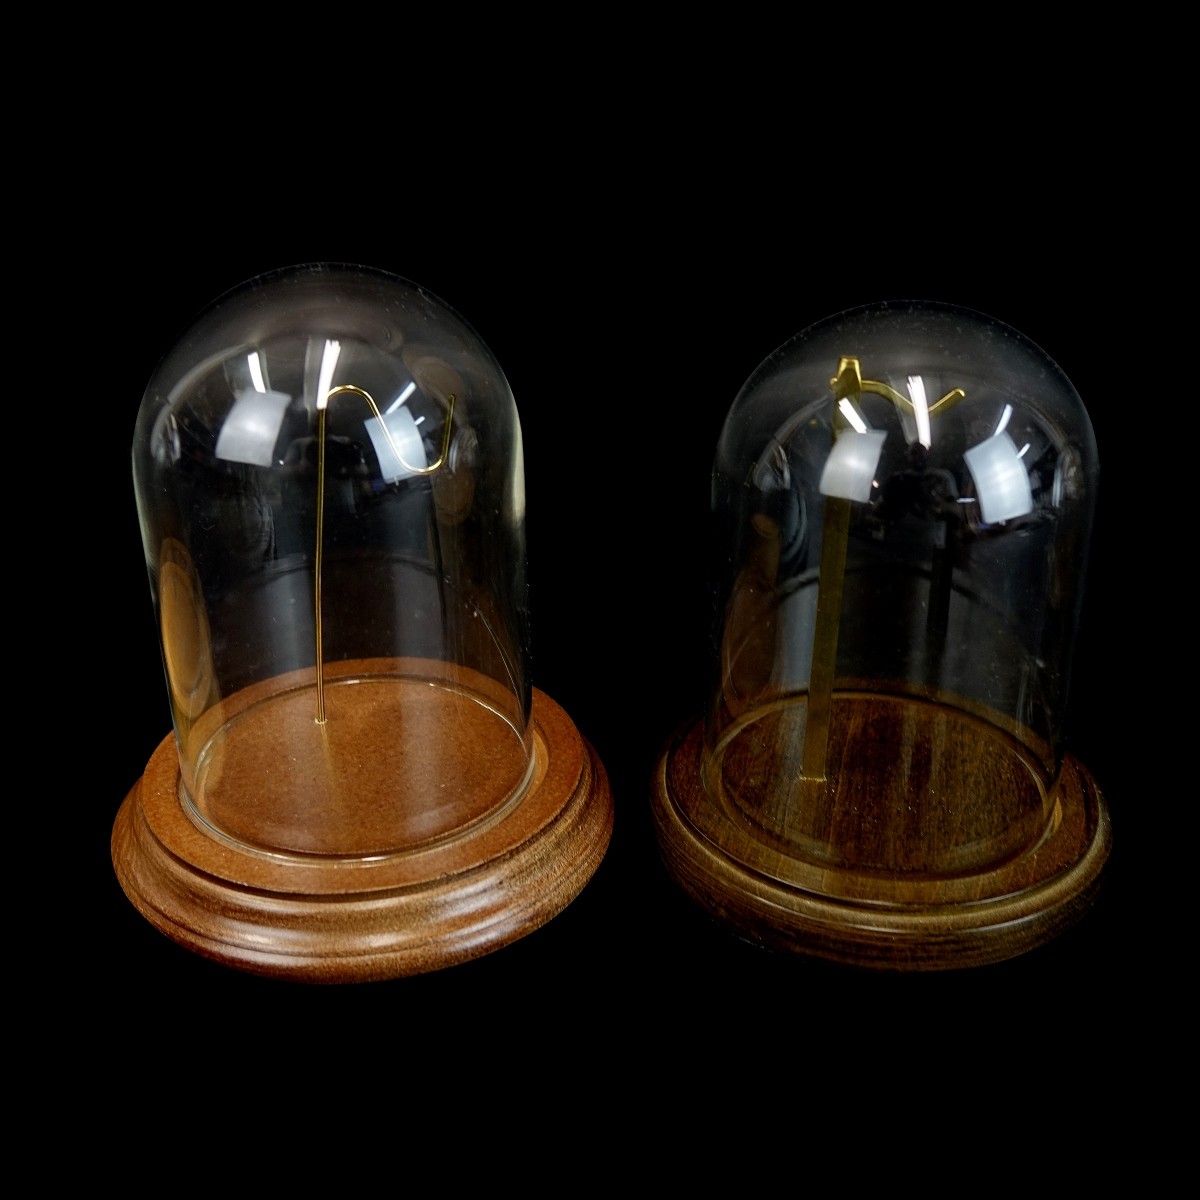 Collection of Pocket Watch Cloches